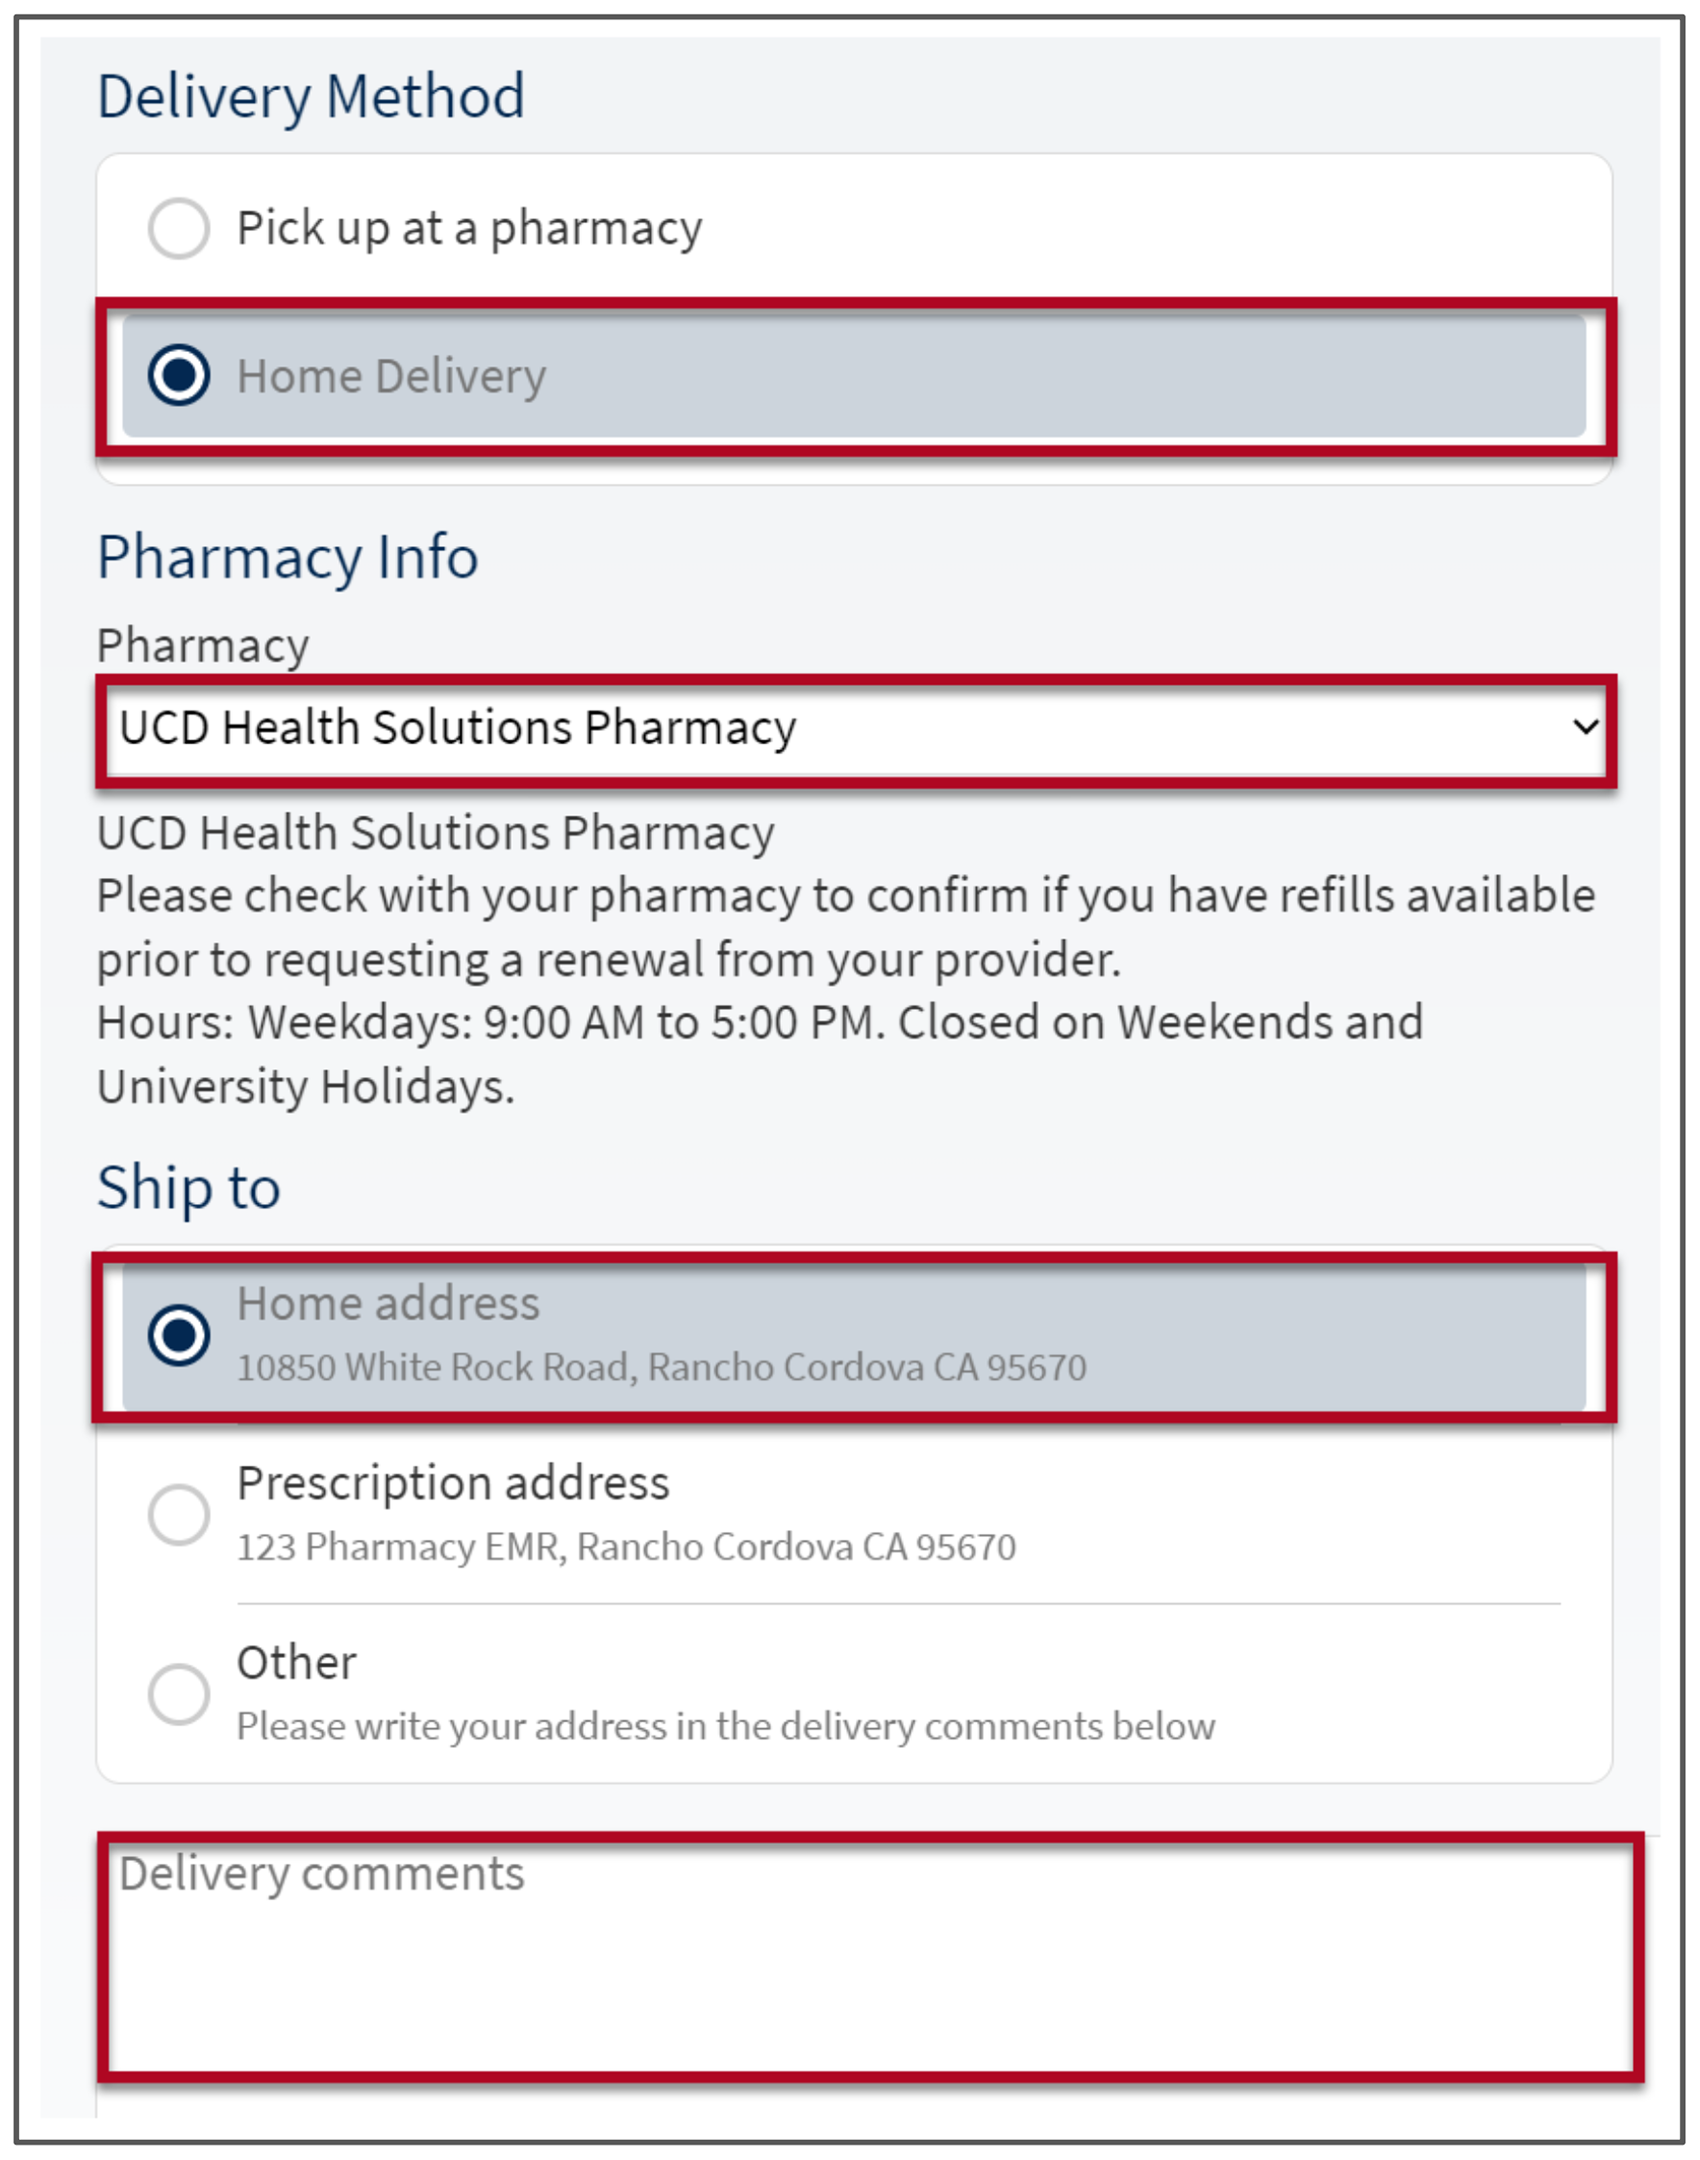 Select Delivery Method, Pharmacy Info, Ship to address and Delivery comments (if applicable).